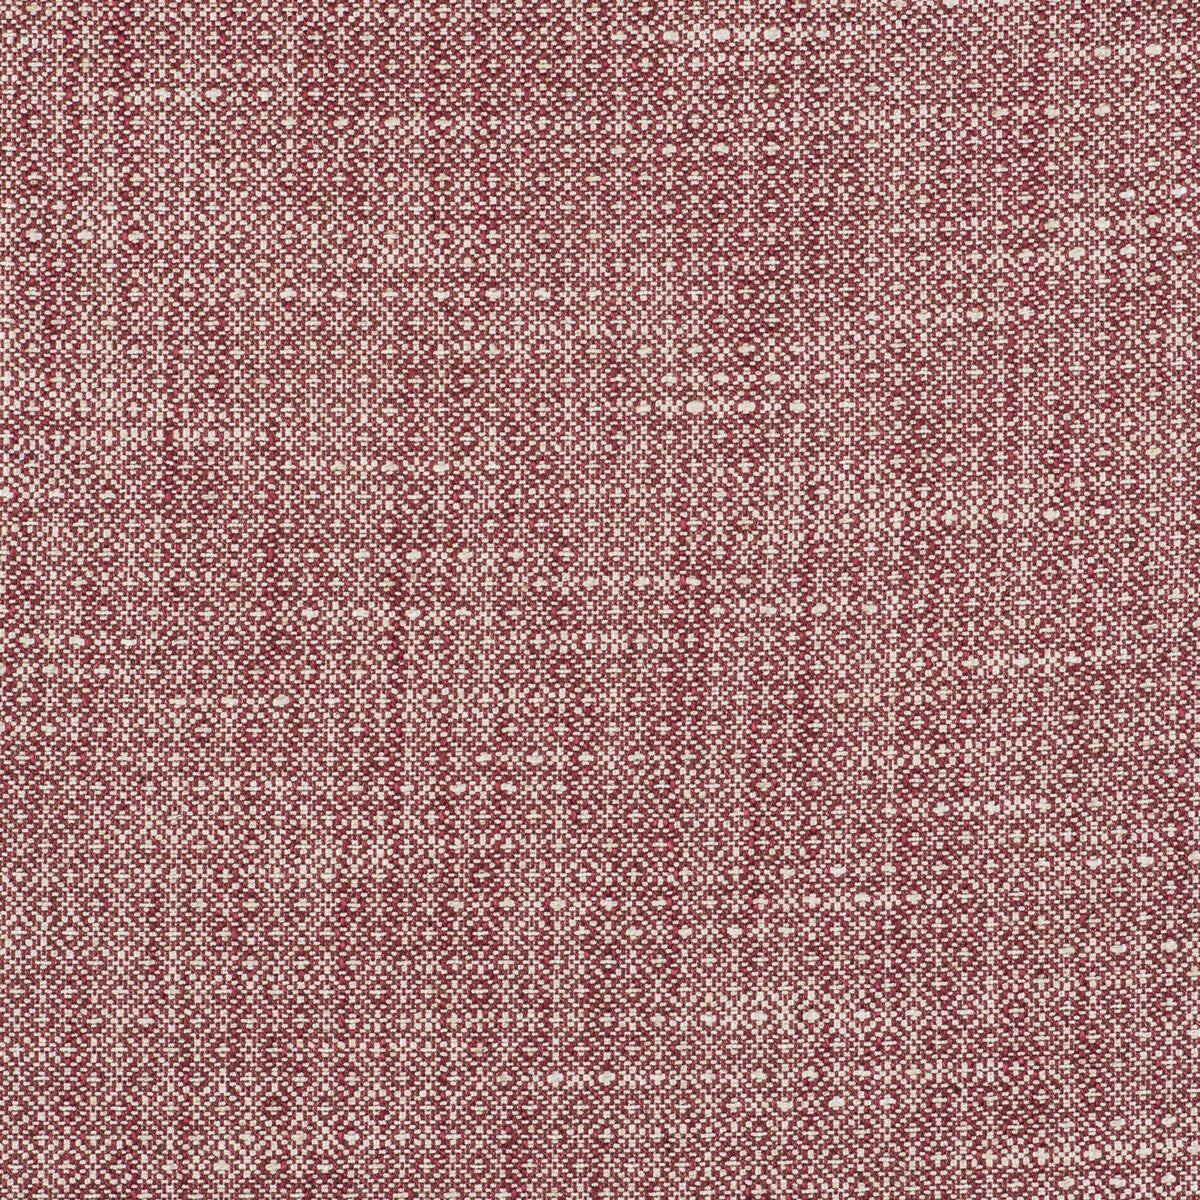 Kf Gyd fabric - pattern GDT5517.014.0 - by Gaston y Daniela in the Gaston Libreria collection